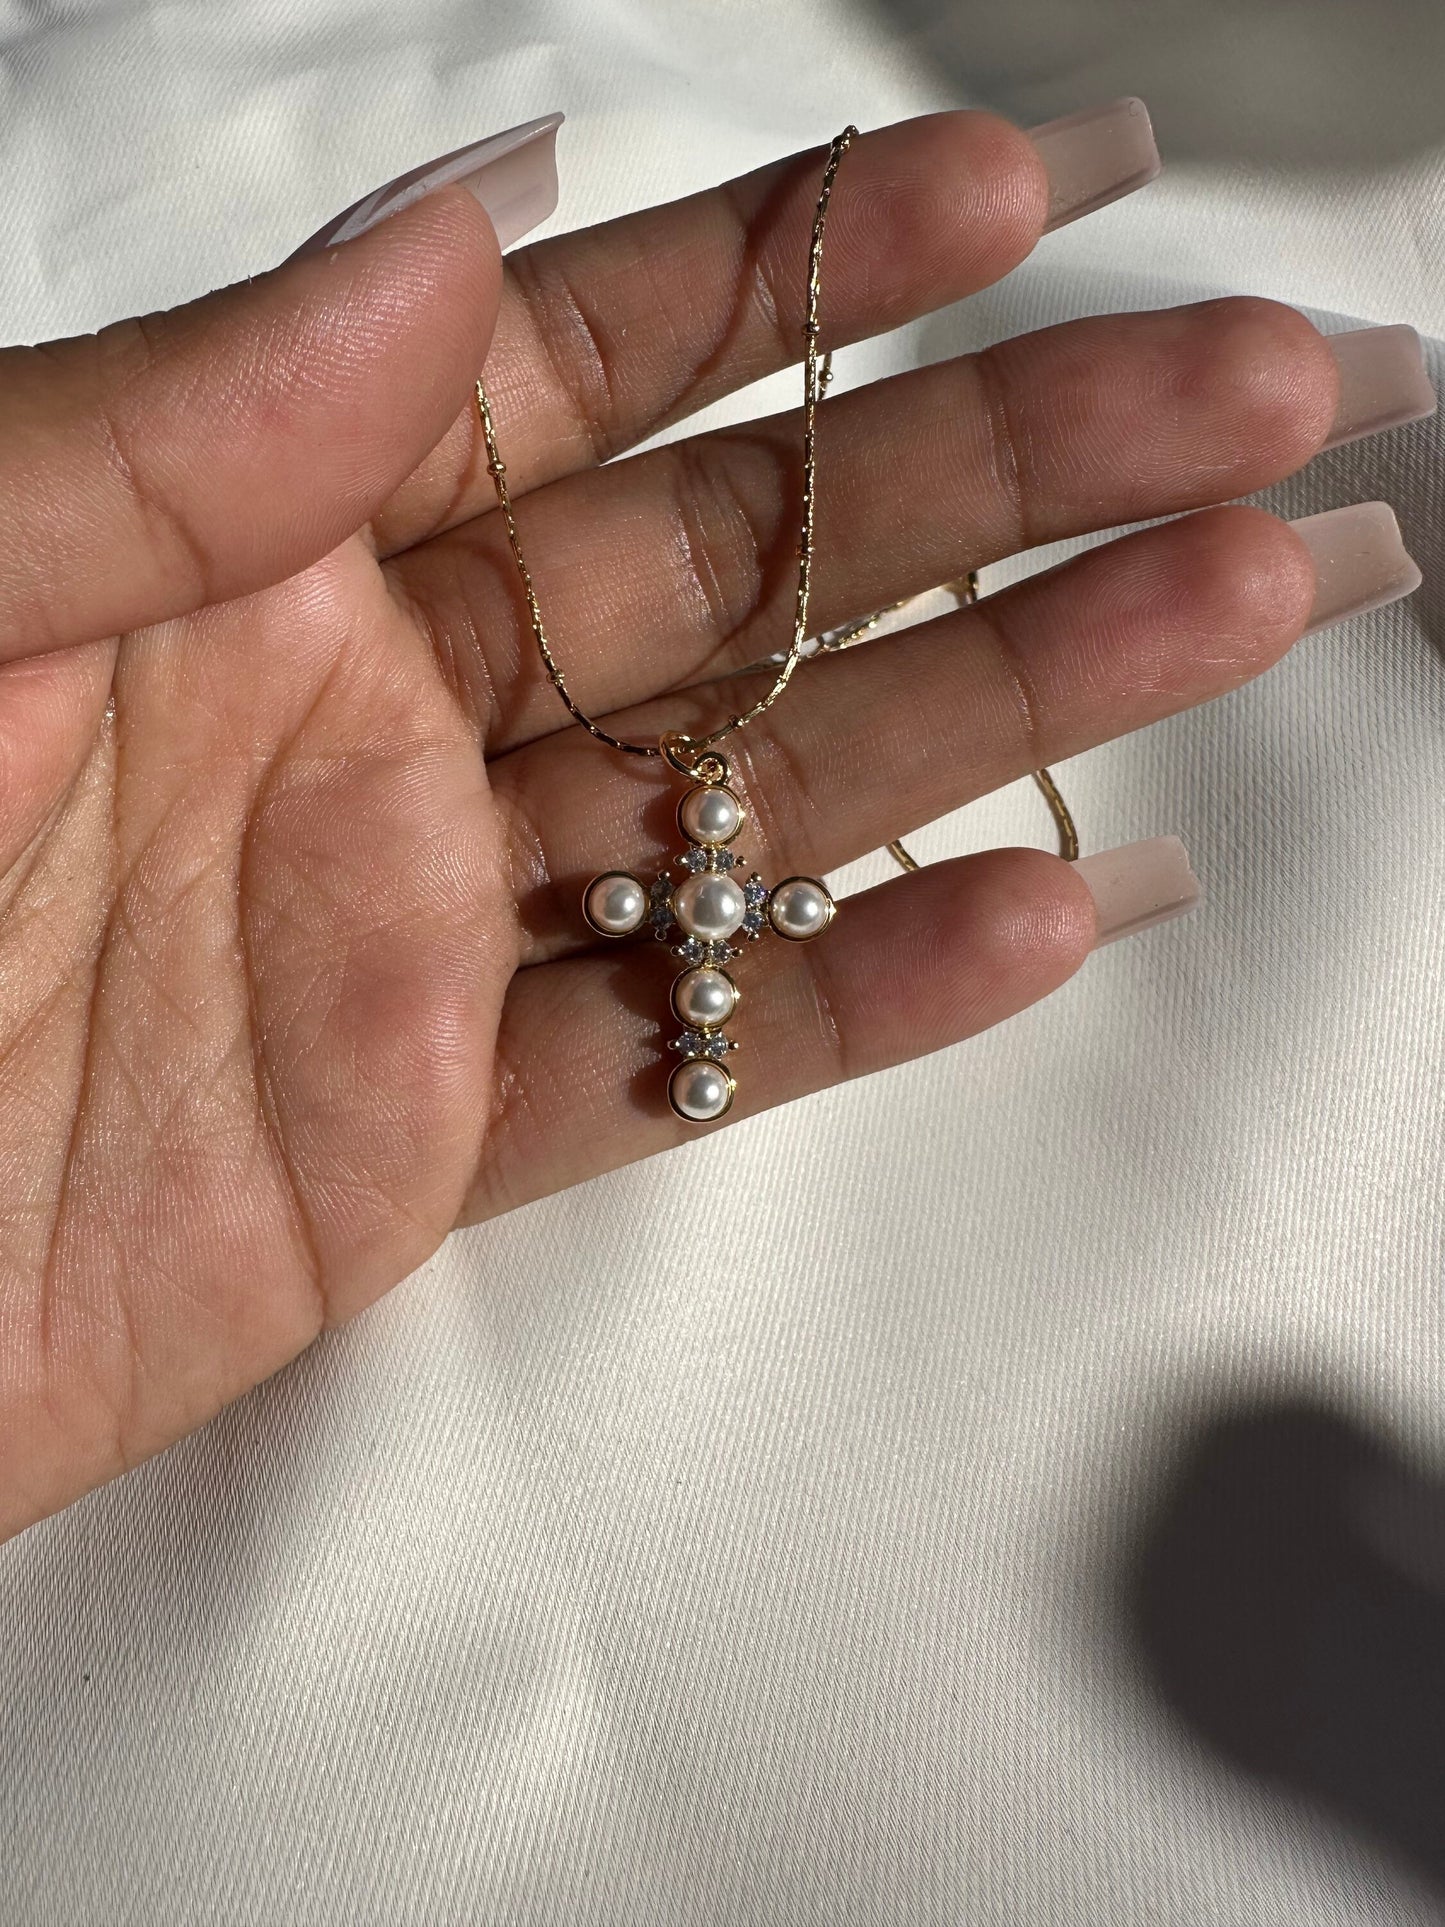 Pearl cross necklace/gold filled Pearl cross necklace